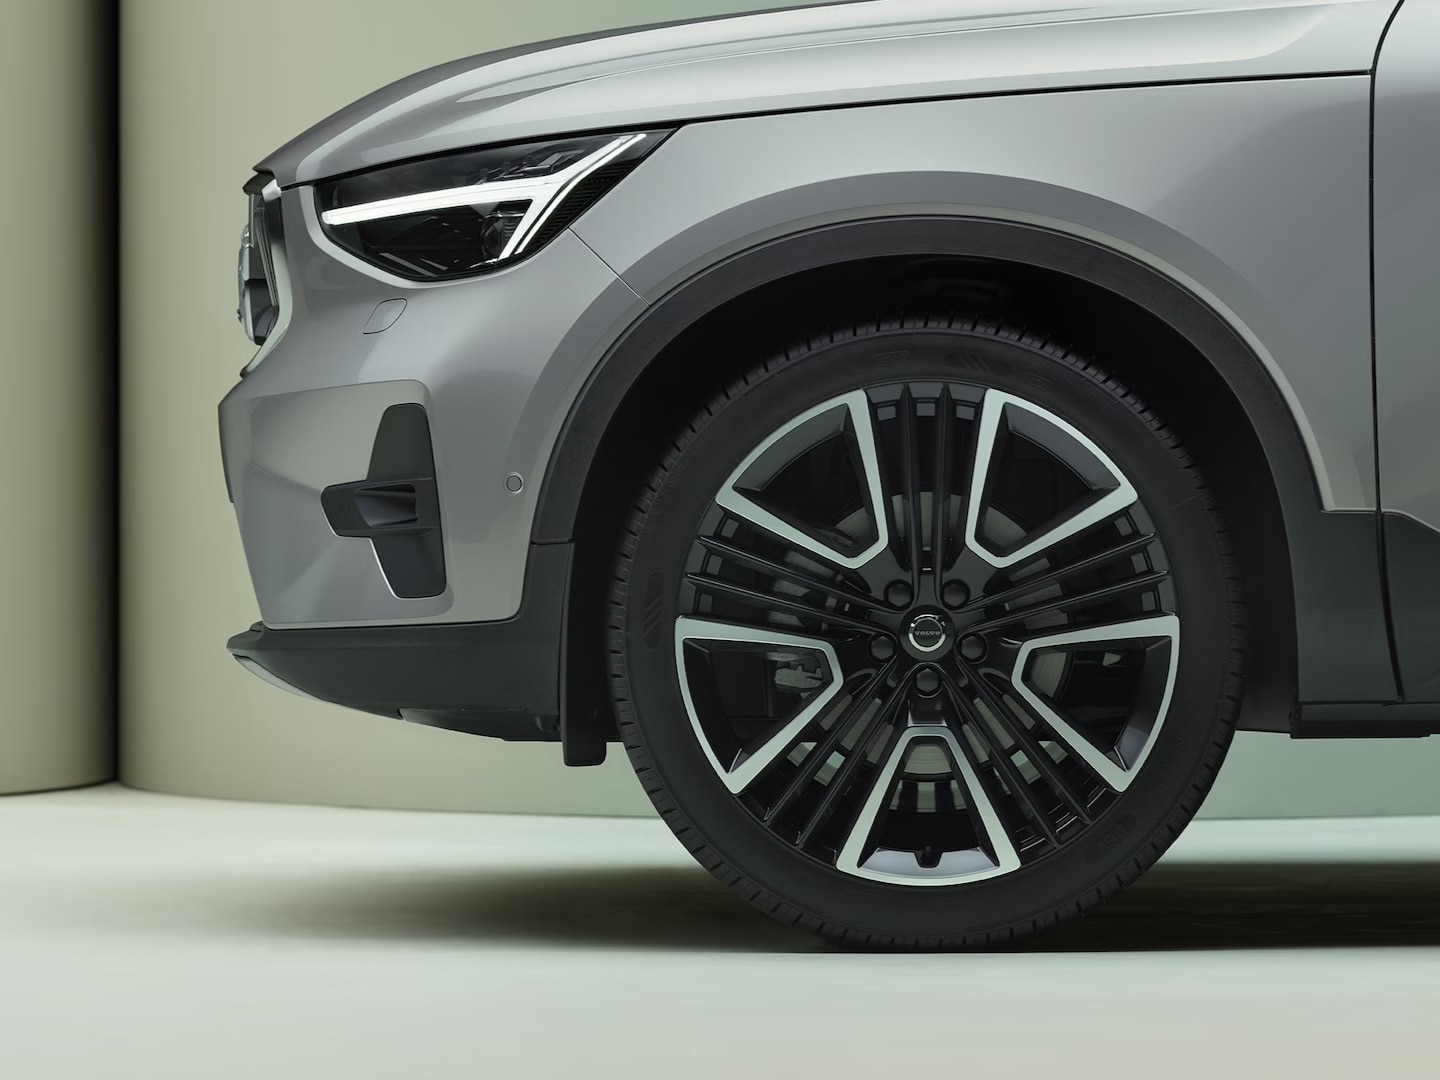 Hubcap and wheel design of the Volvo XC40 mild hybrid SUV.